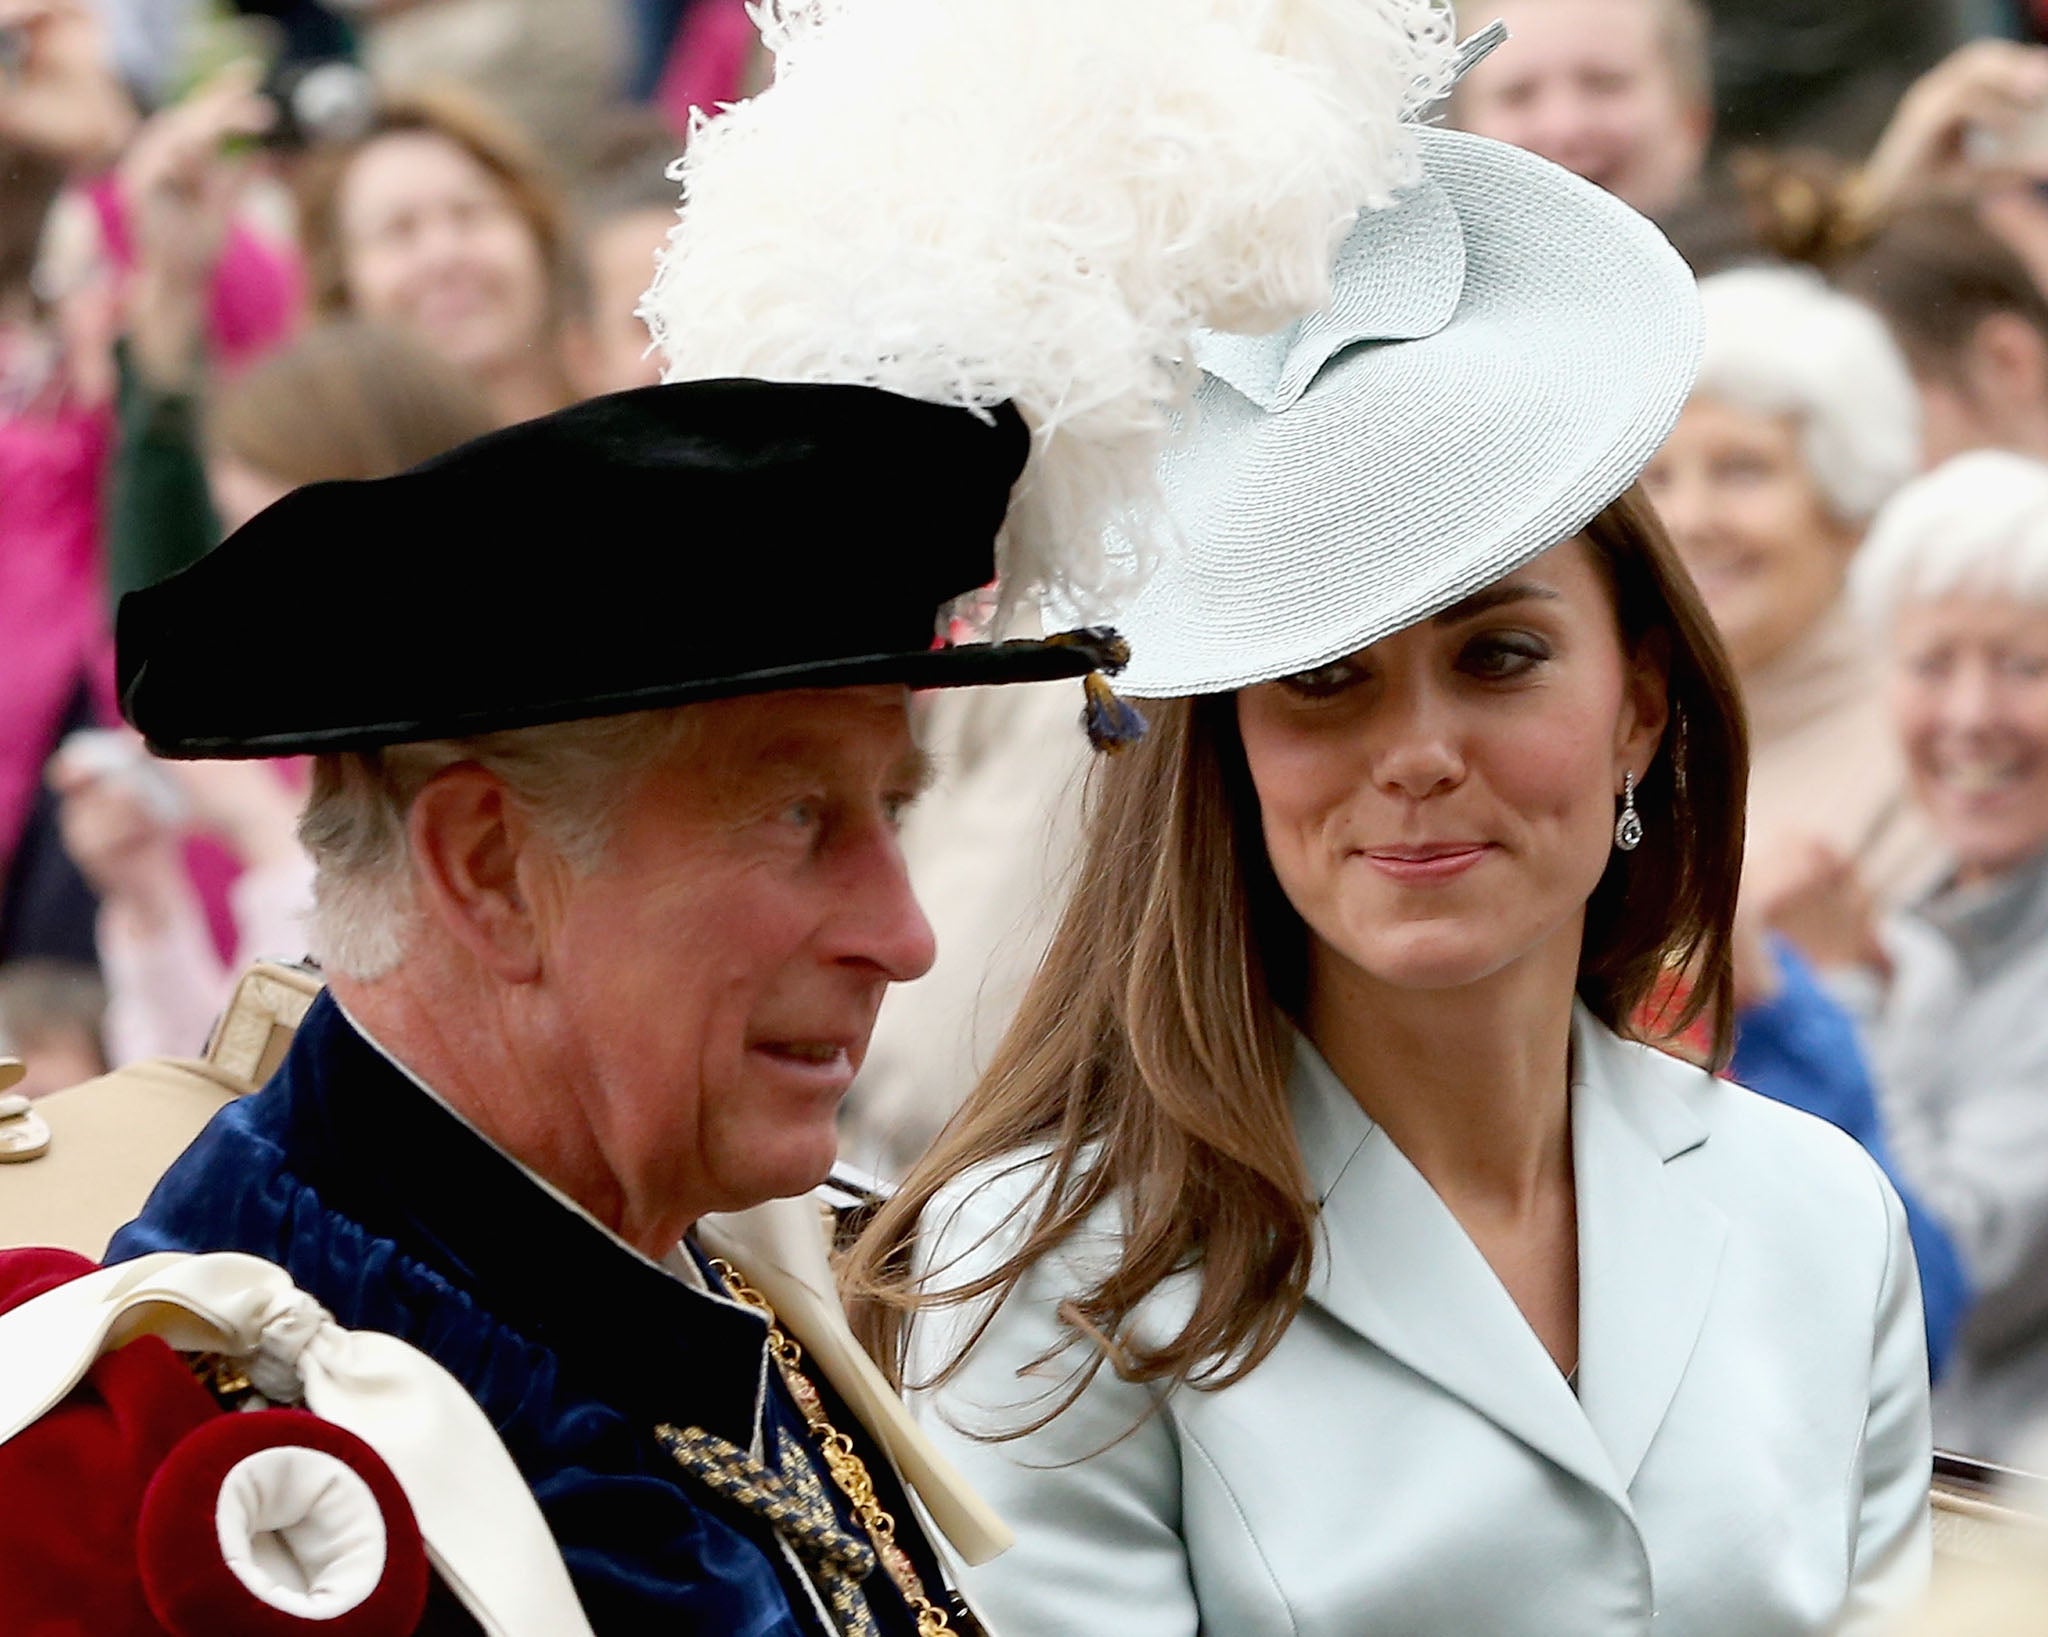 Prince Charles and the Duchess of Cambridge at The Order Of The Garter Service in June 2014